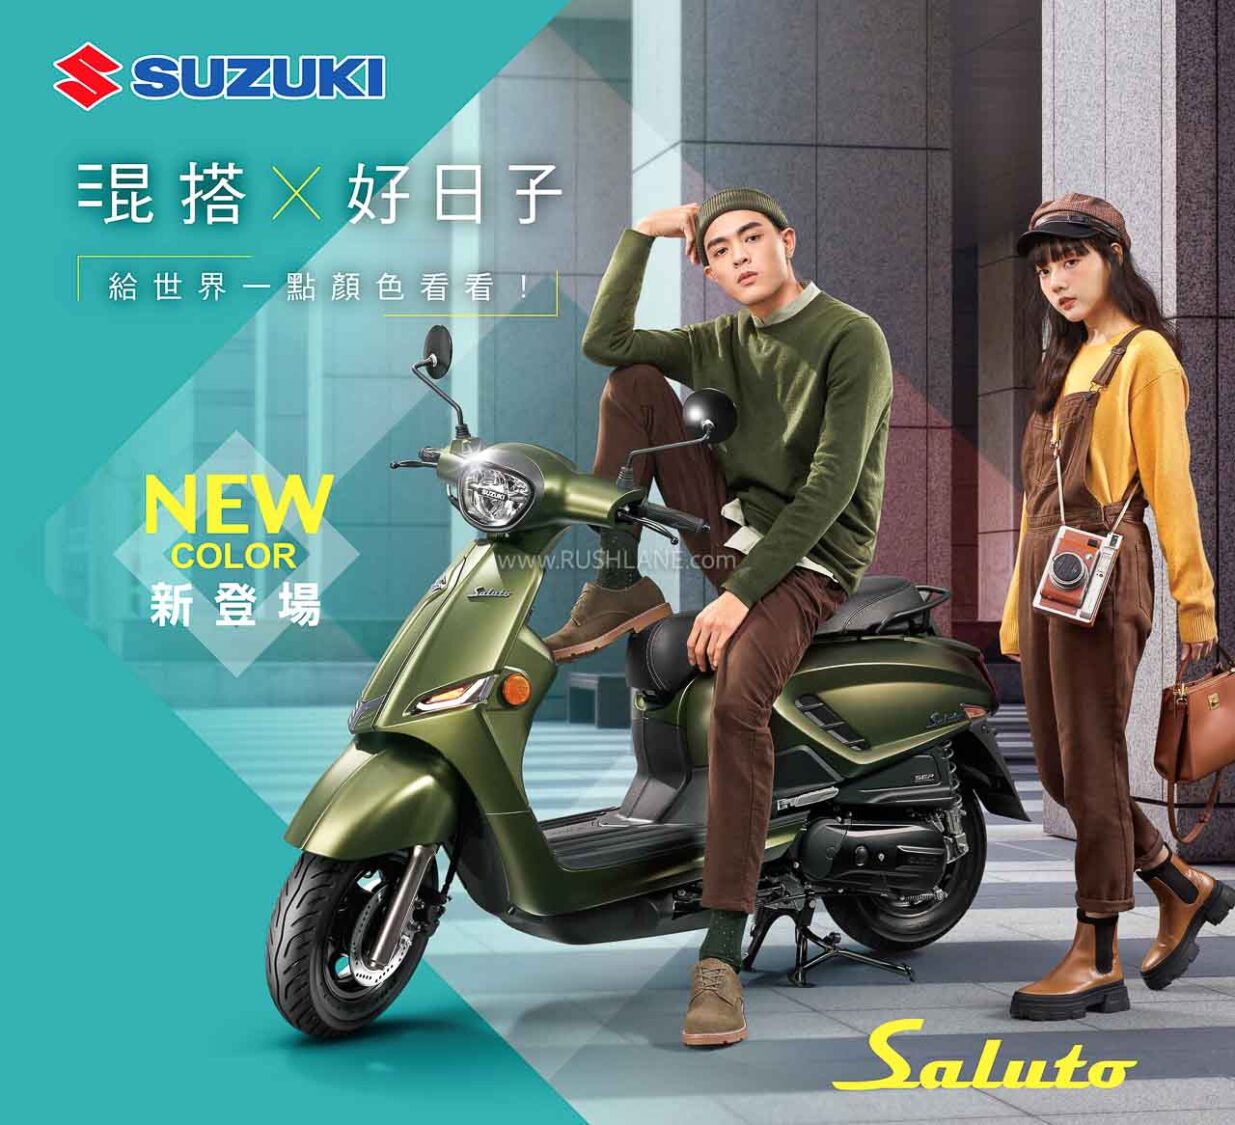 2022 Suzuki Swish, Saluto 125cc Scooters Debut With New Features